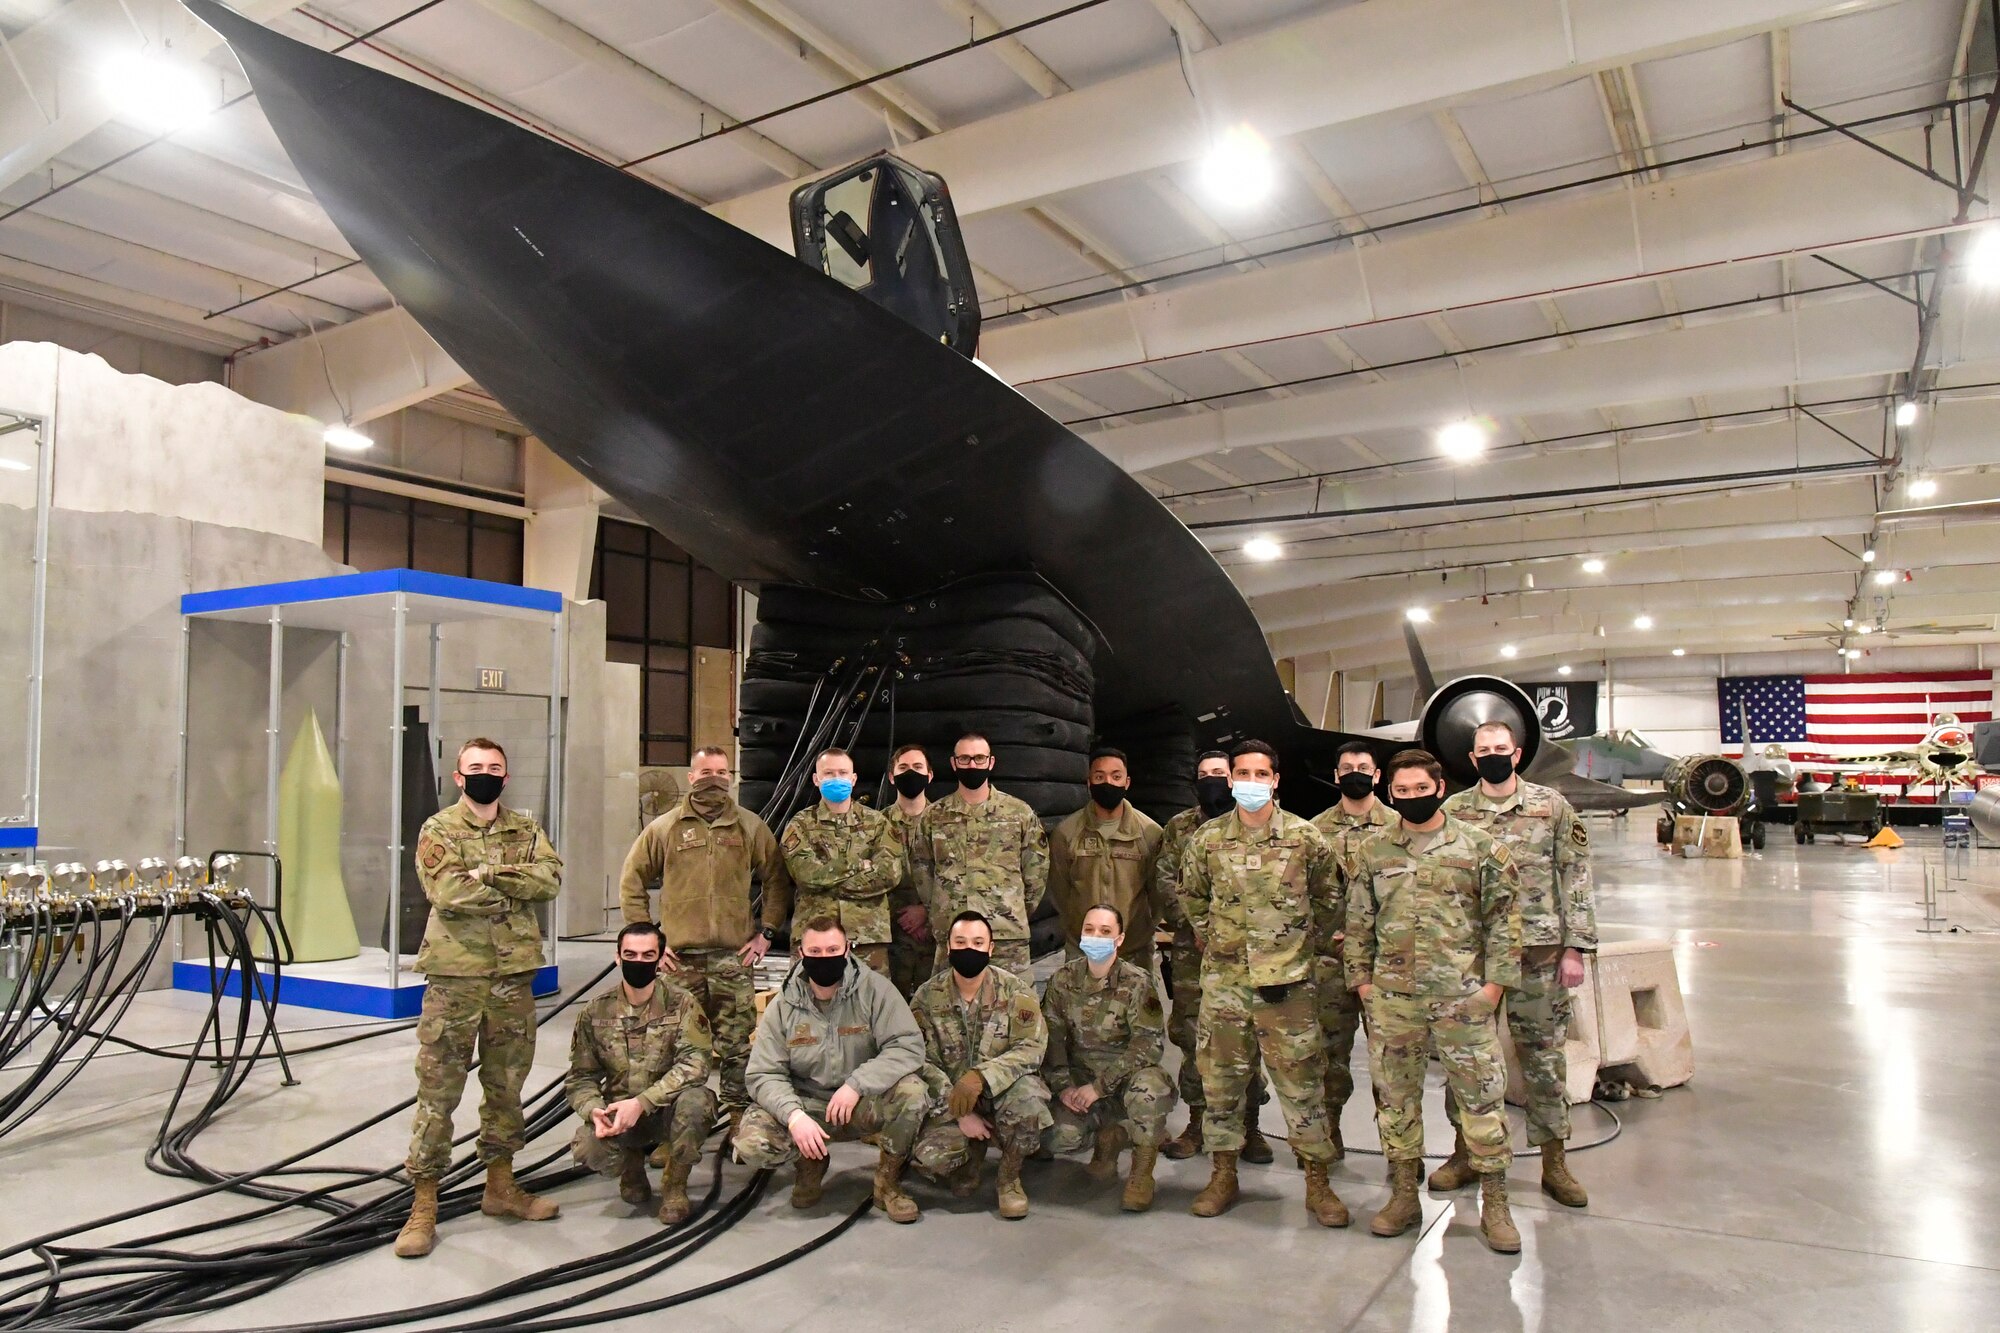 388th Maintenance Squadron maintainers gather for a photo after lifting the nose of an SR-71 static display Jan. 12, 2022, Hill Air Force Base Utah. The SR-71 “Blackbird” is on display at the Hill Aerospace Museum and was lifted by staff and 388th maintainers in order to give the jet a take-off profile appearance while allowing museum guests a closer look under and around the aircraft. (U.S. Air Force photo by Todd Cromar)